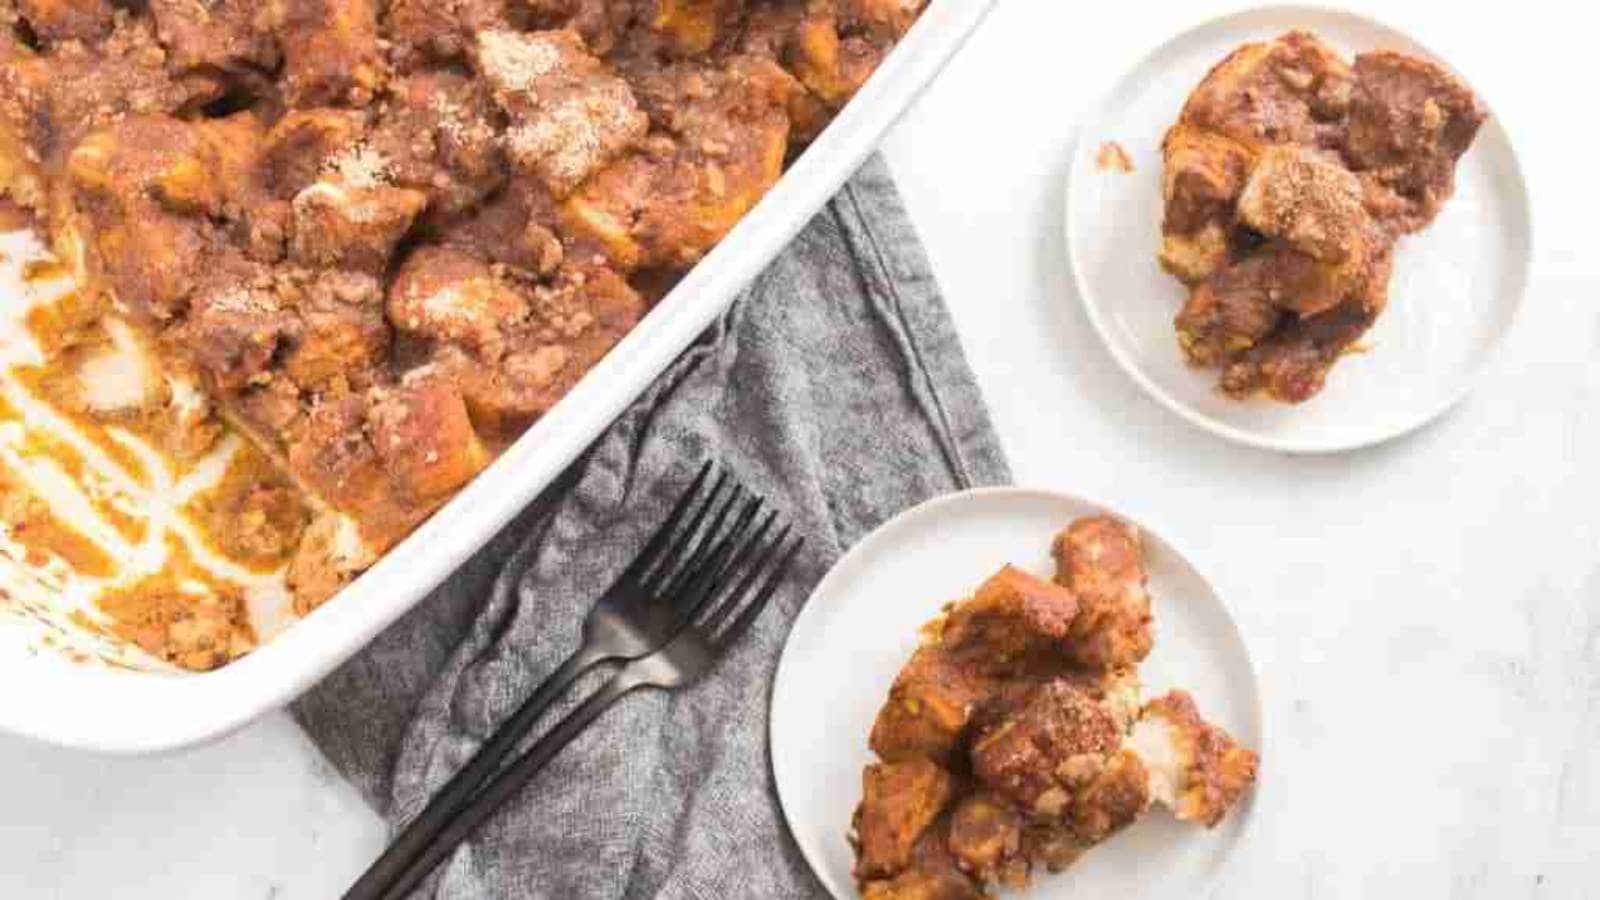 Delicious Pumpkin French Toast Casserole Bake recipe by Two Kids And A Coupon.